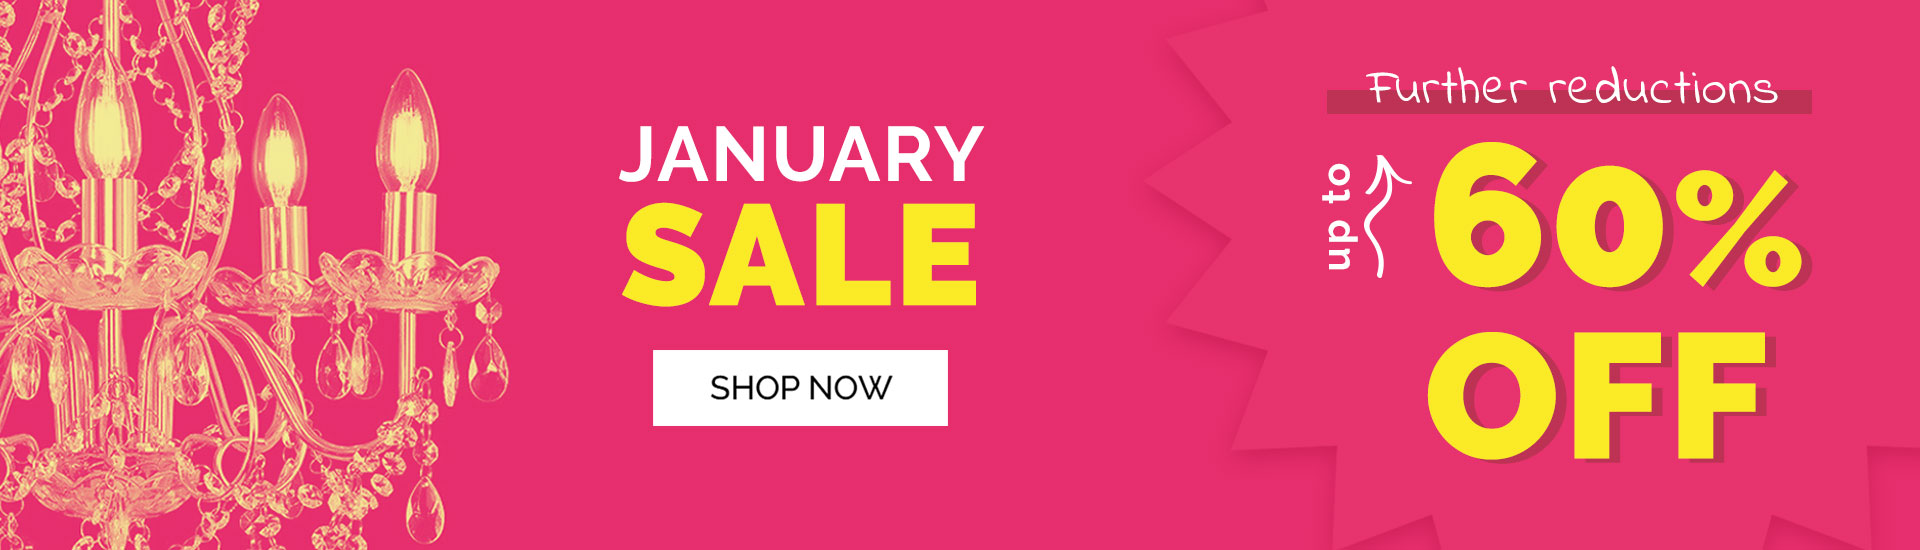 January Sale | Further Reductions | Up To 60% OFF | Shop Now